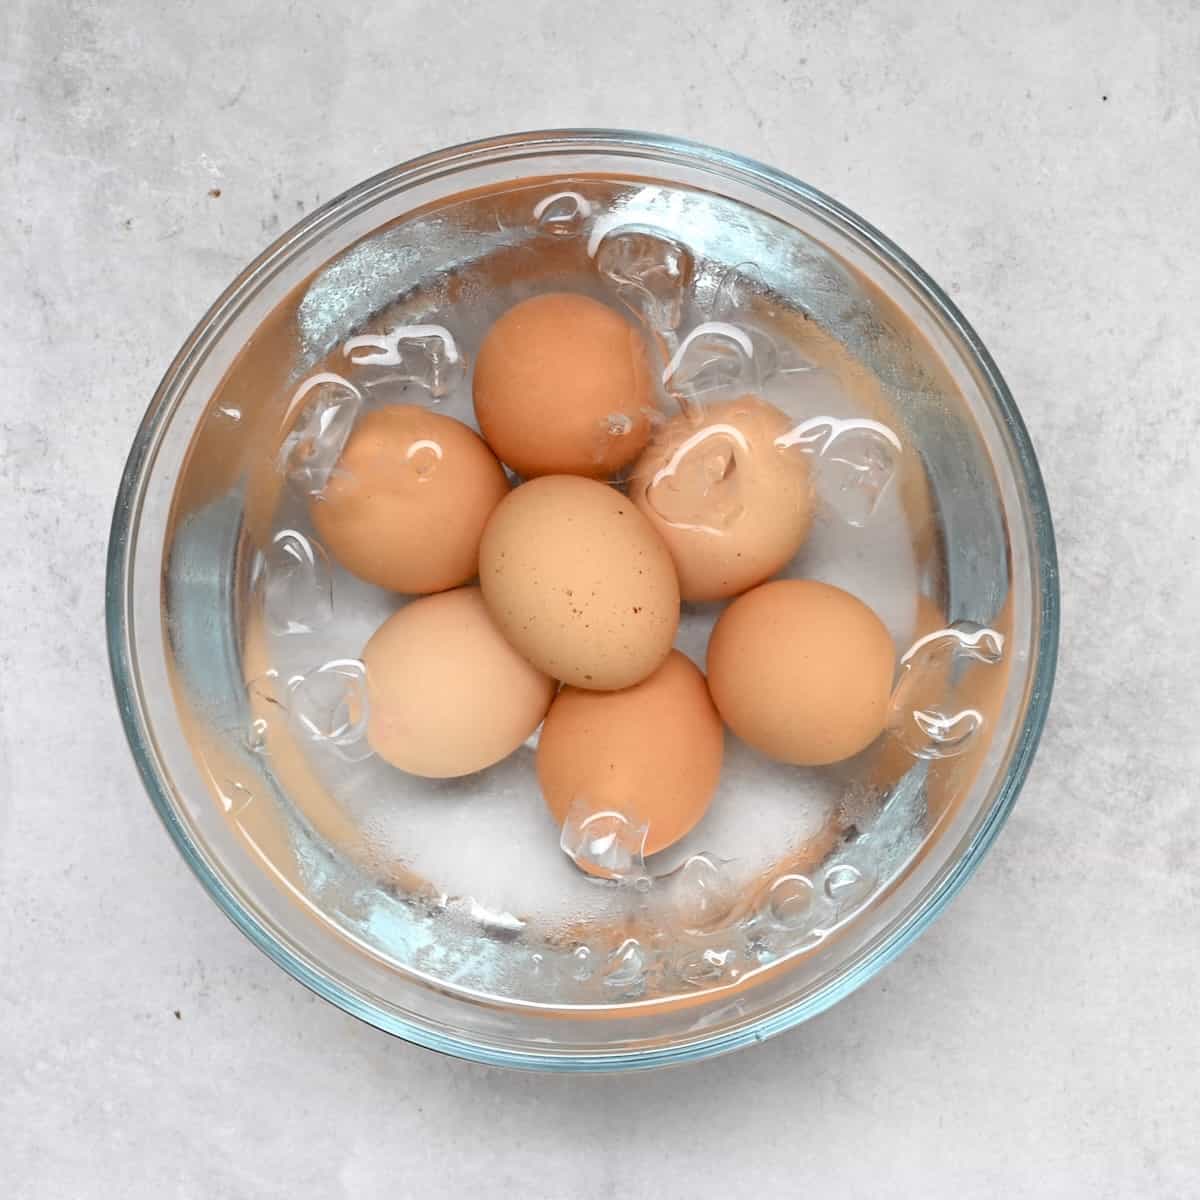 Boiled eggs in a bowl with iced water